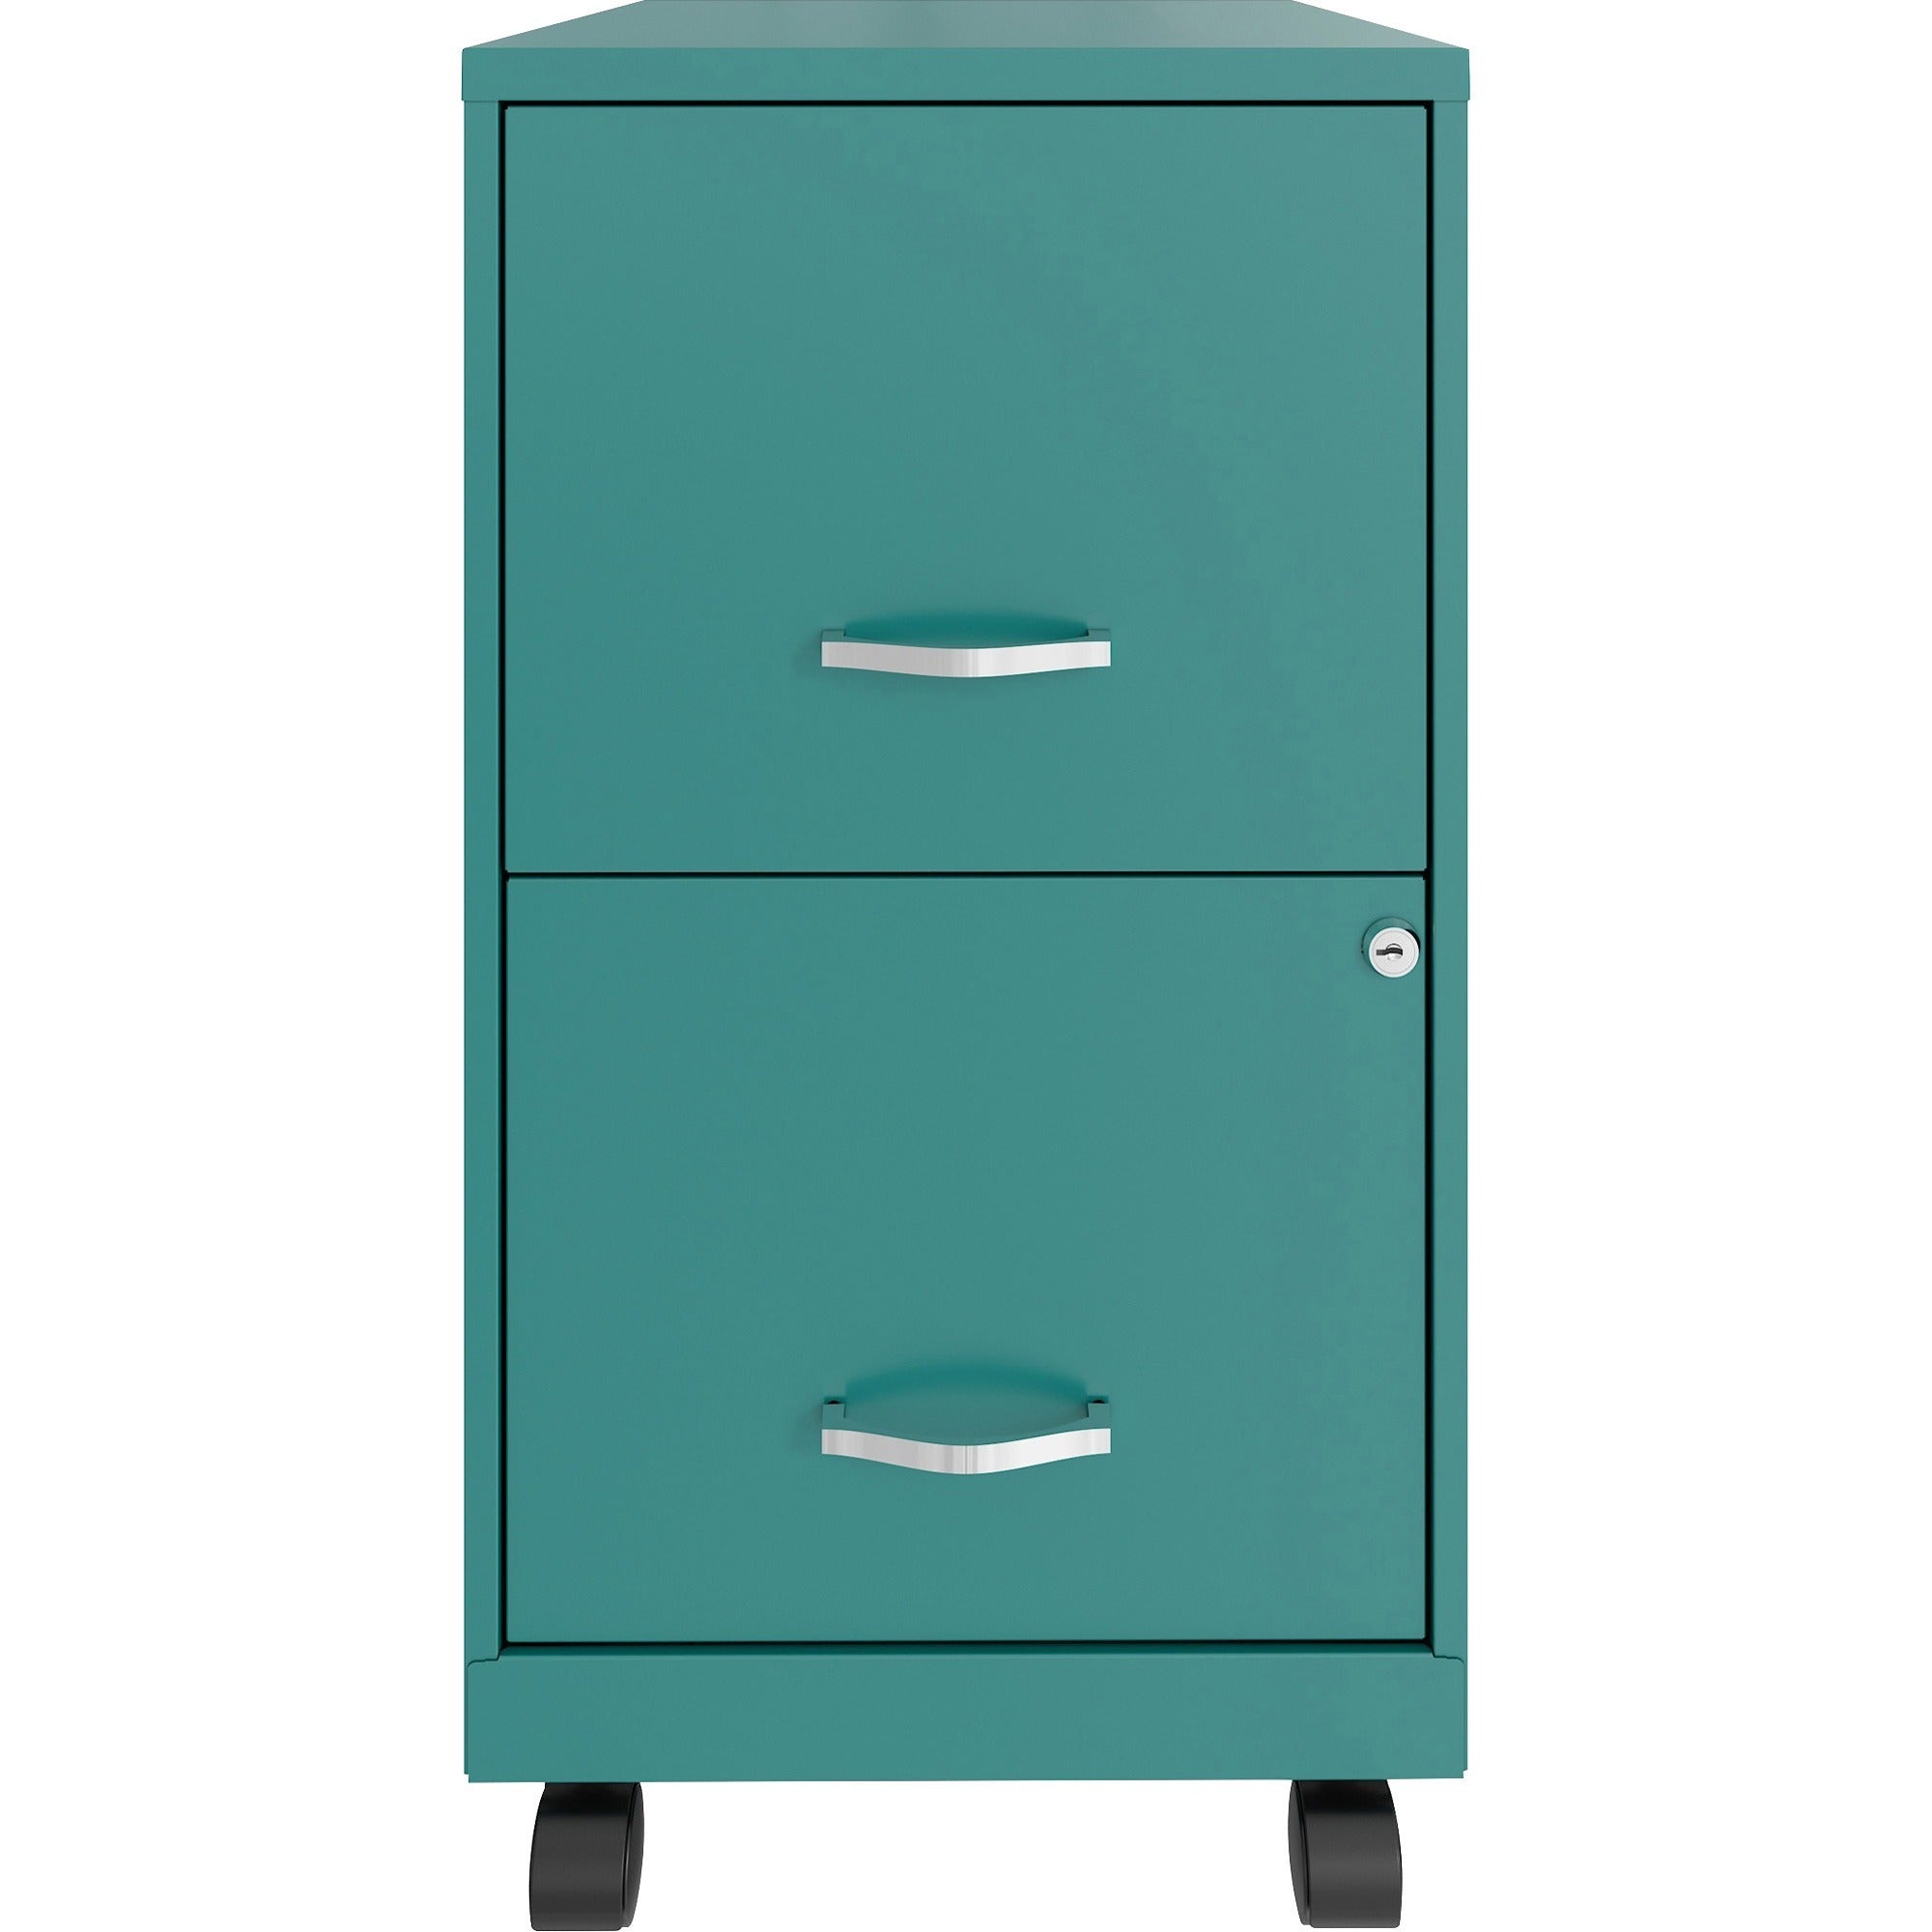 nusparc-mobile-file-cabinet-142-x-18-x-265-for-file-letter-mobility-locking-drawer-glide-suspension-3-4-drawer-extension-cam-lock-nonporous-surface-teal-painted-steel-steel-recycled_nprvf218amtl - 2